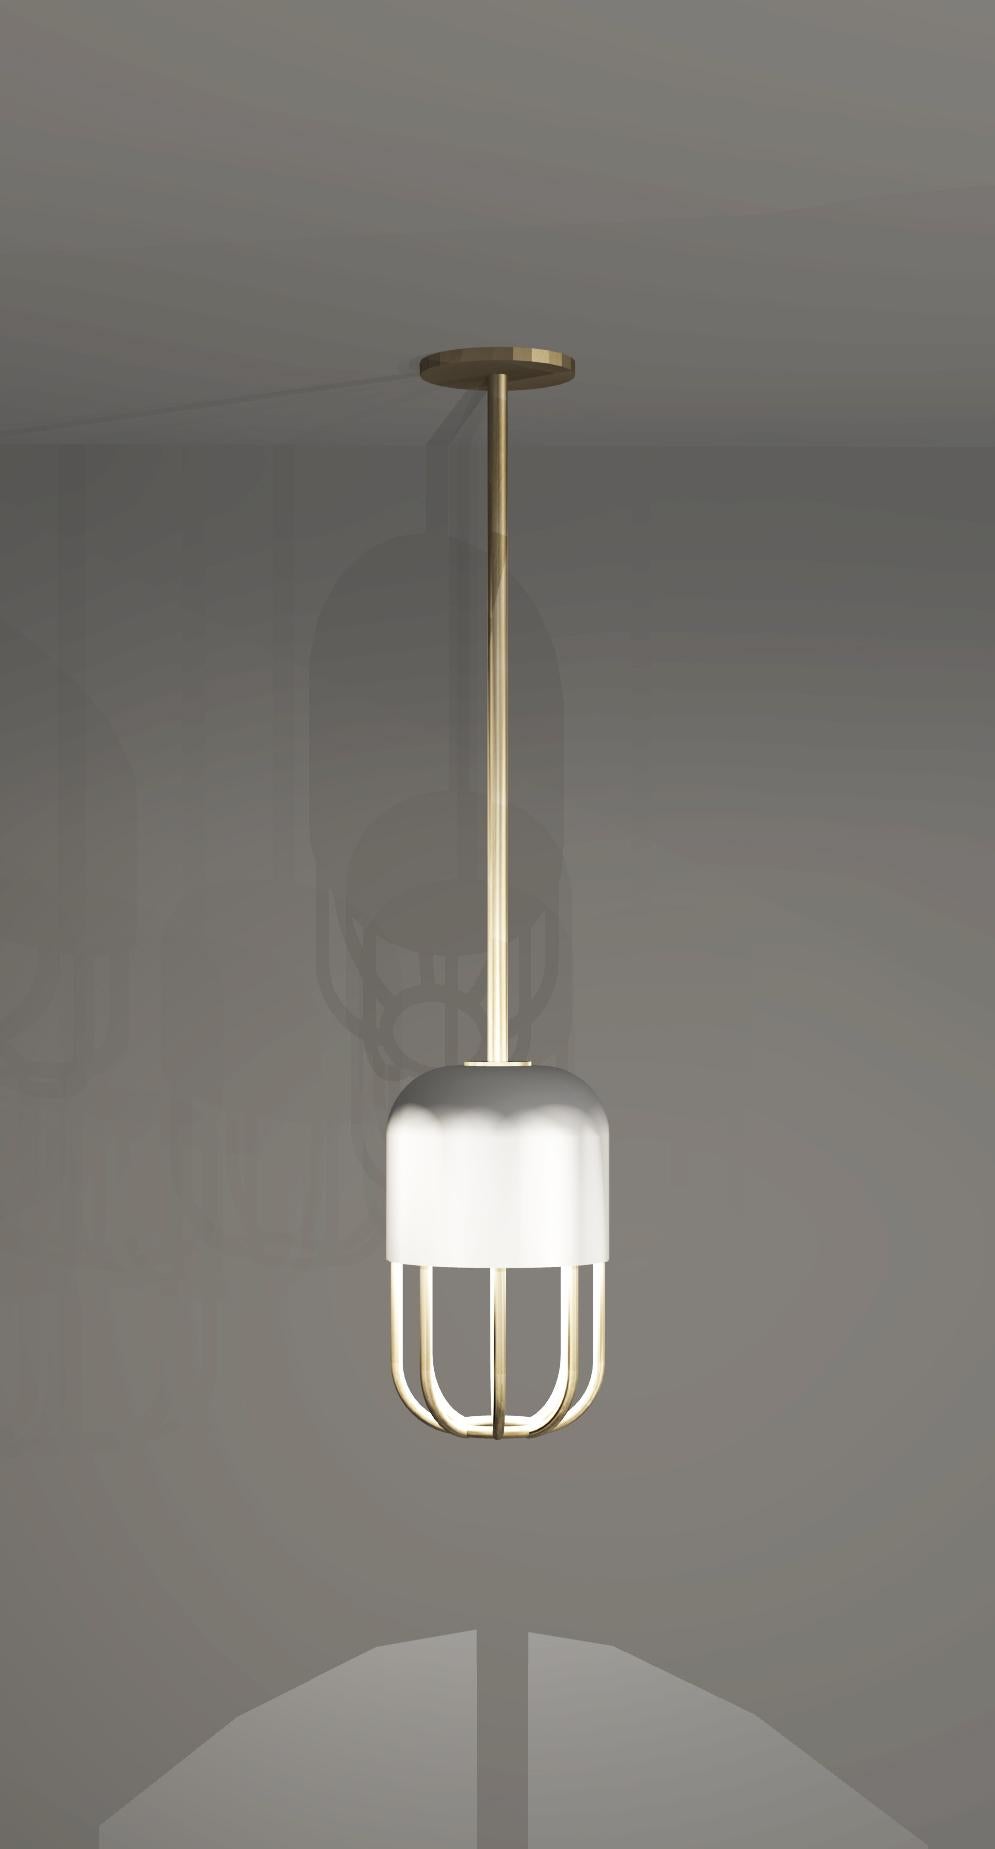 This ceiling light has a bold design that uses symmetry between the outer casing and the frame of a capsule shape. The soft glow of opal glass is elegantly supported and highlighted by a beautiful brushed brass structure.
Metalwork can be